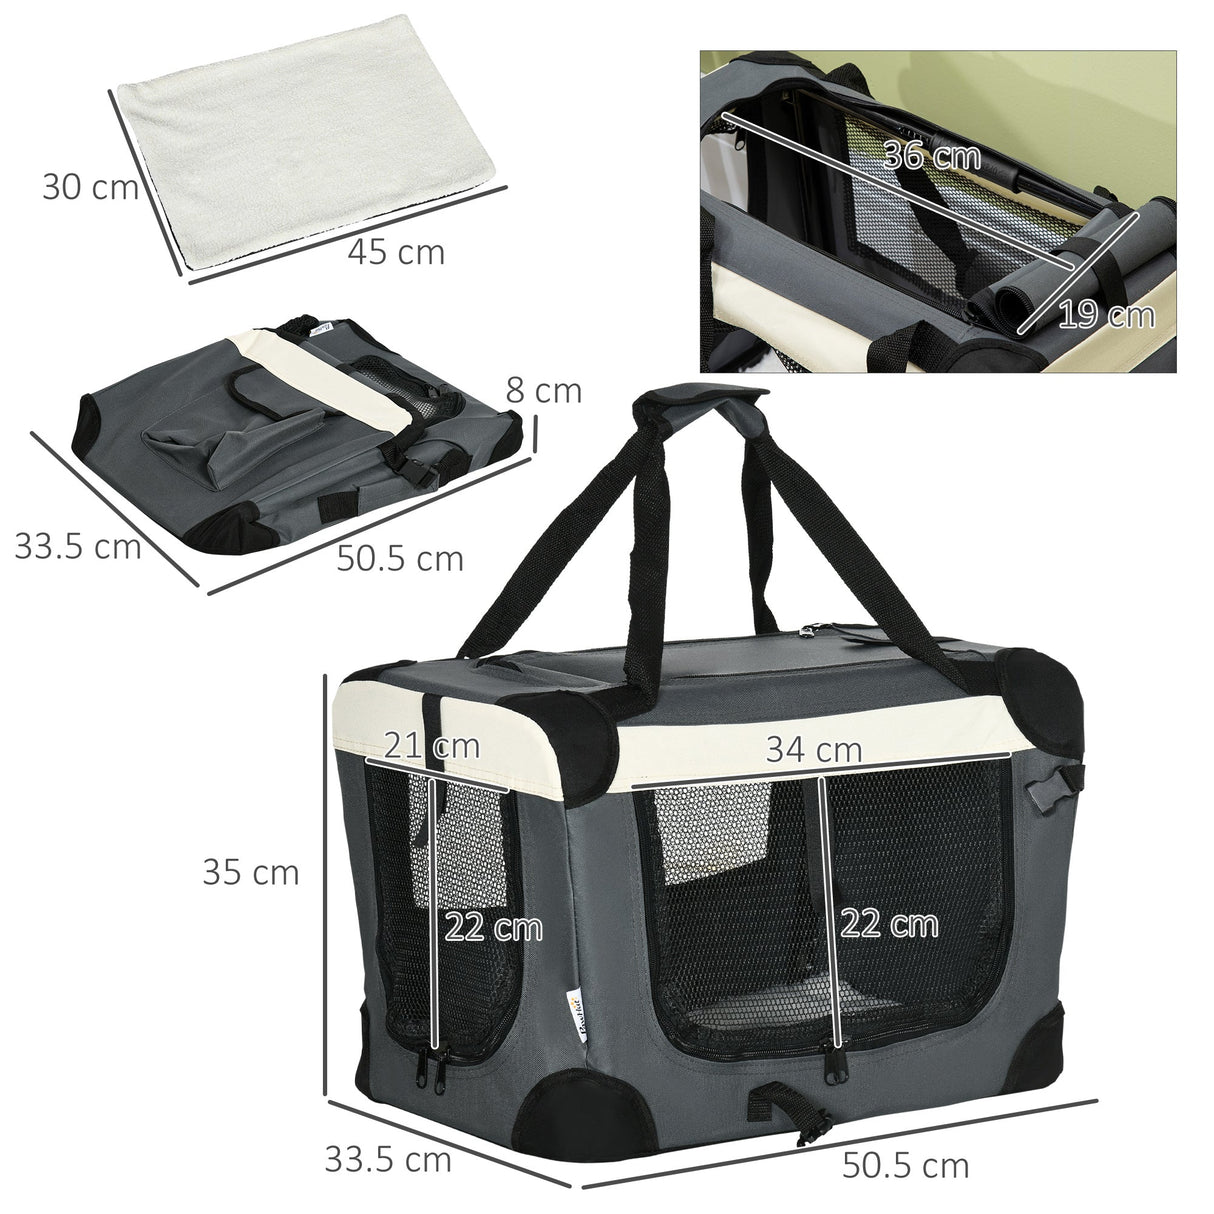 51cm Foldable Pet Carrier, with Cushion, for Mini Dogs and Cats, PawHut, Grey